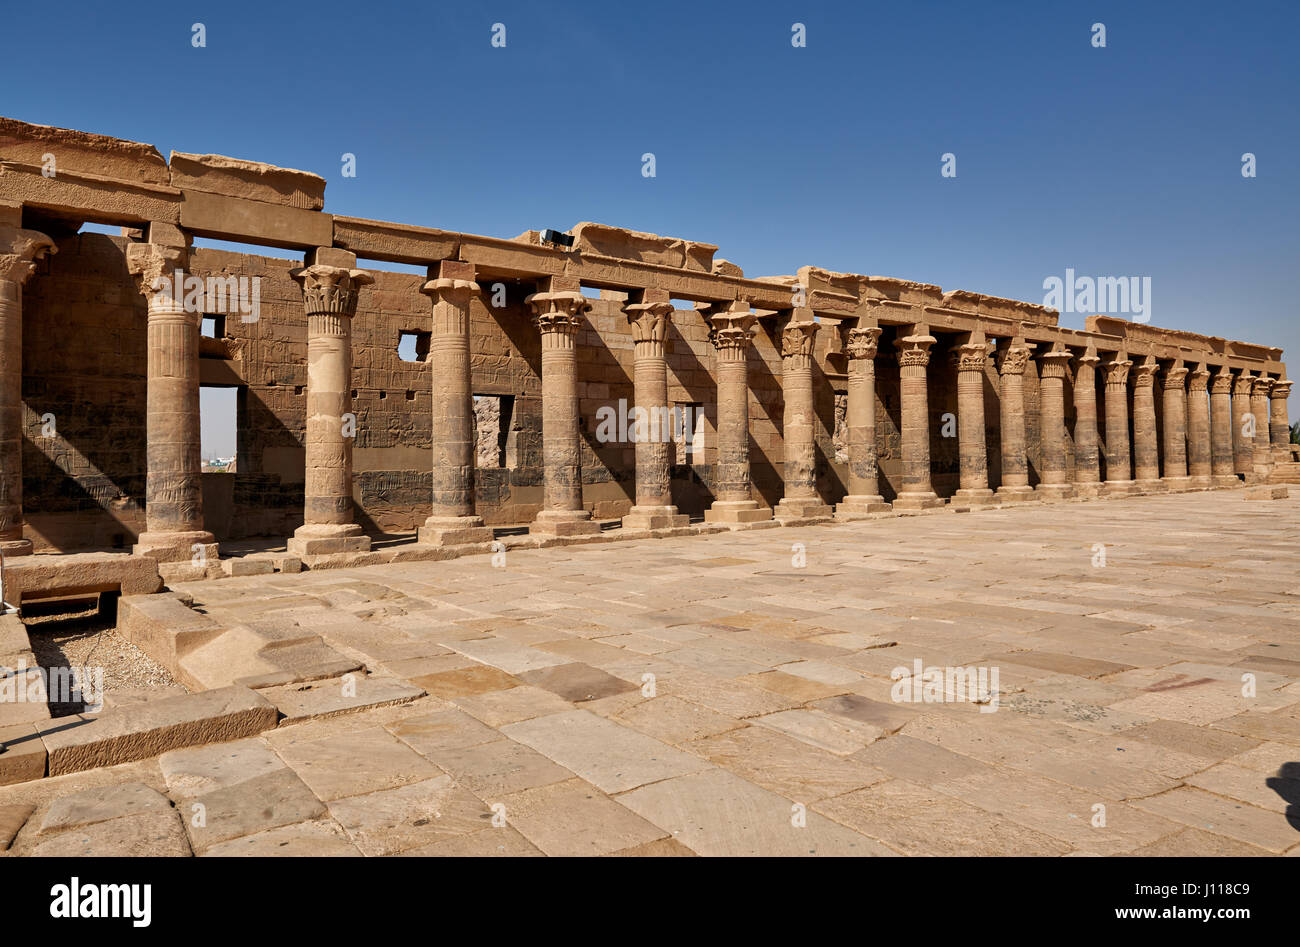 colonnade in ptolemaic temple of Philae, Aswan, Egypt, Africa Stock Photo